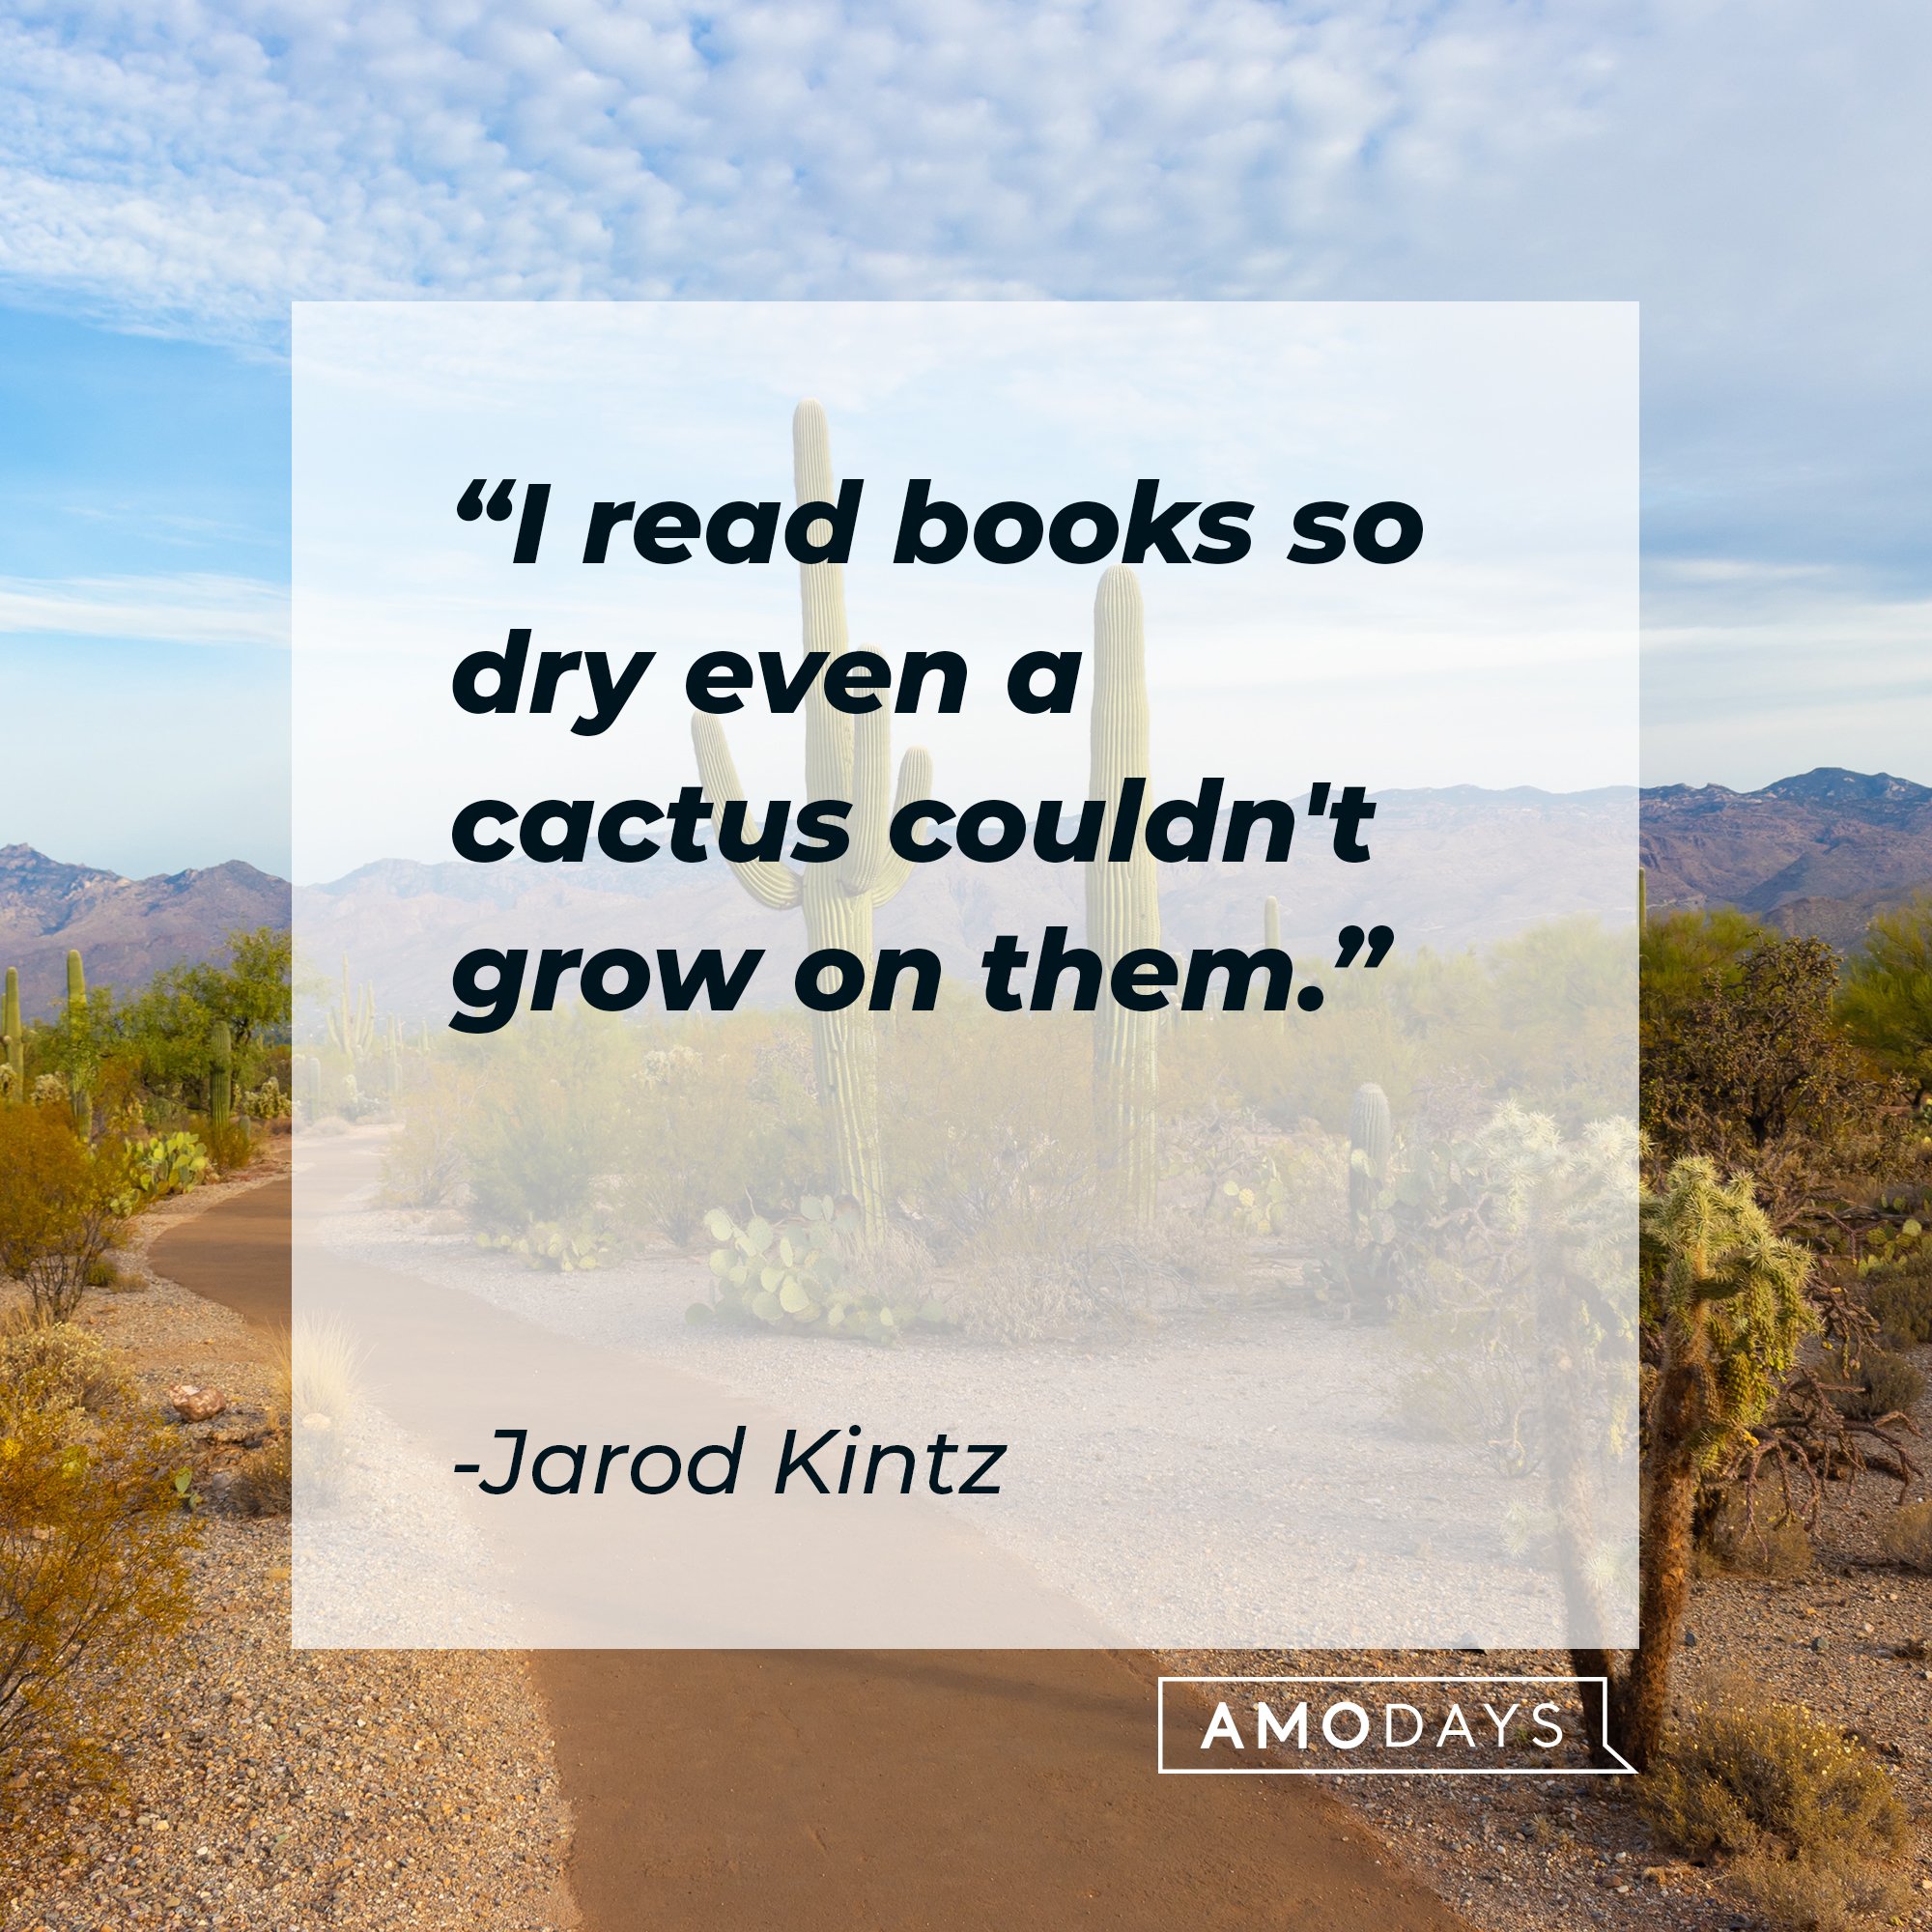 Jarod Kintz’ quote: "I read books so dry even a cactus couldn't grow on them.” | Image: AmoDays  